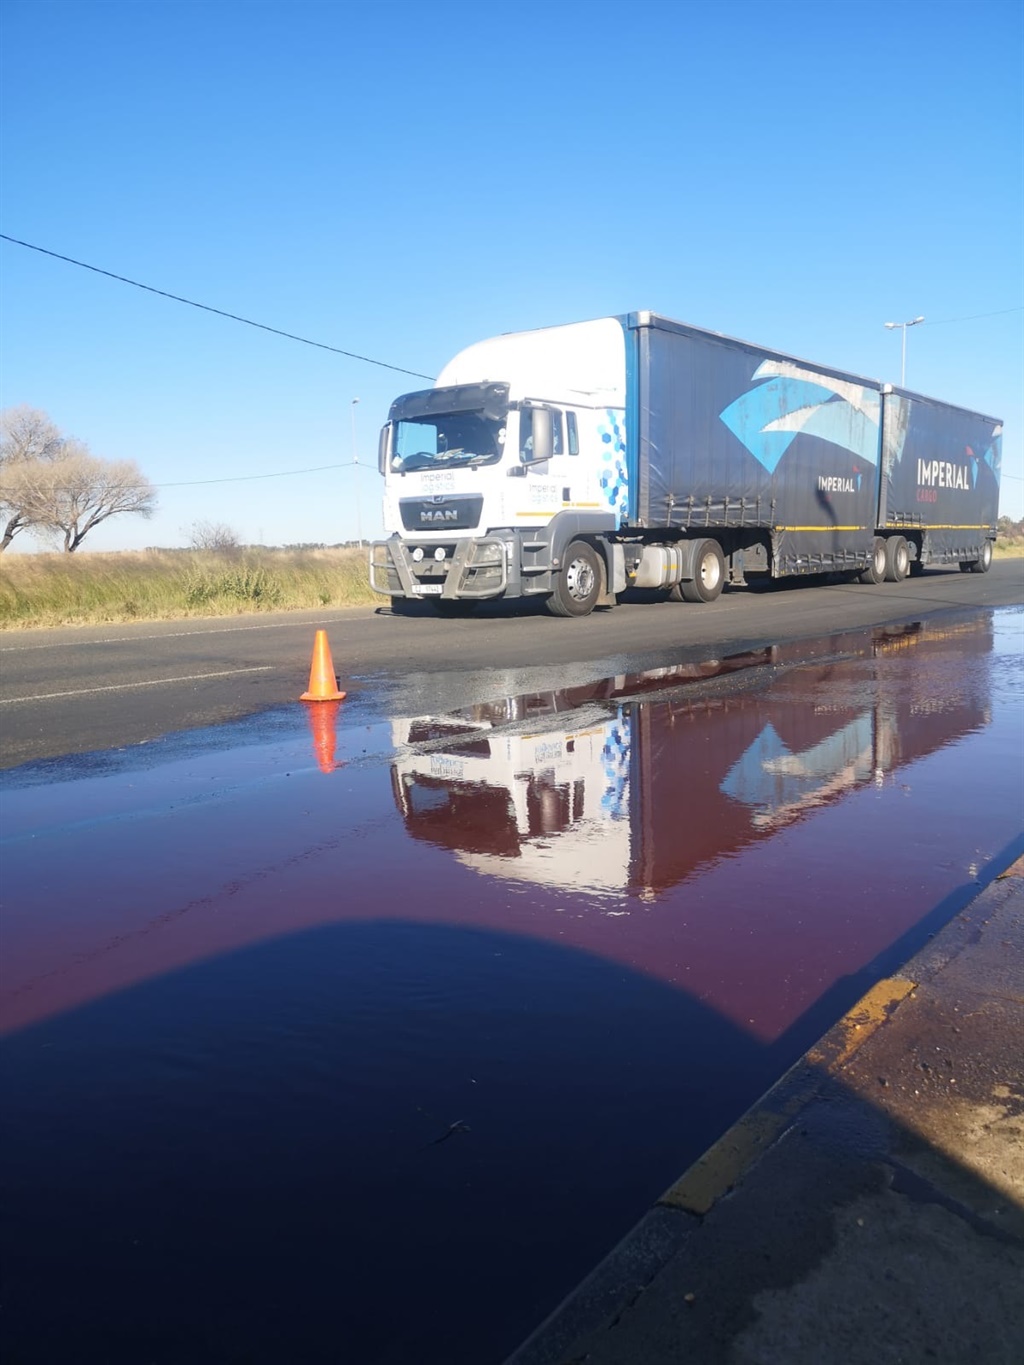 Blood on the M10 road in Bloemfontein appears every week and motorists say it will cause serious accidents. Kabelo Tlhabanelo.